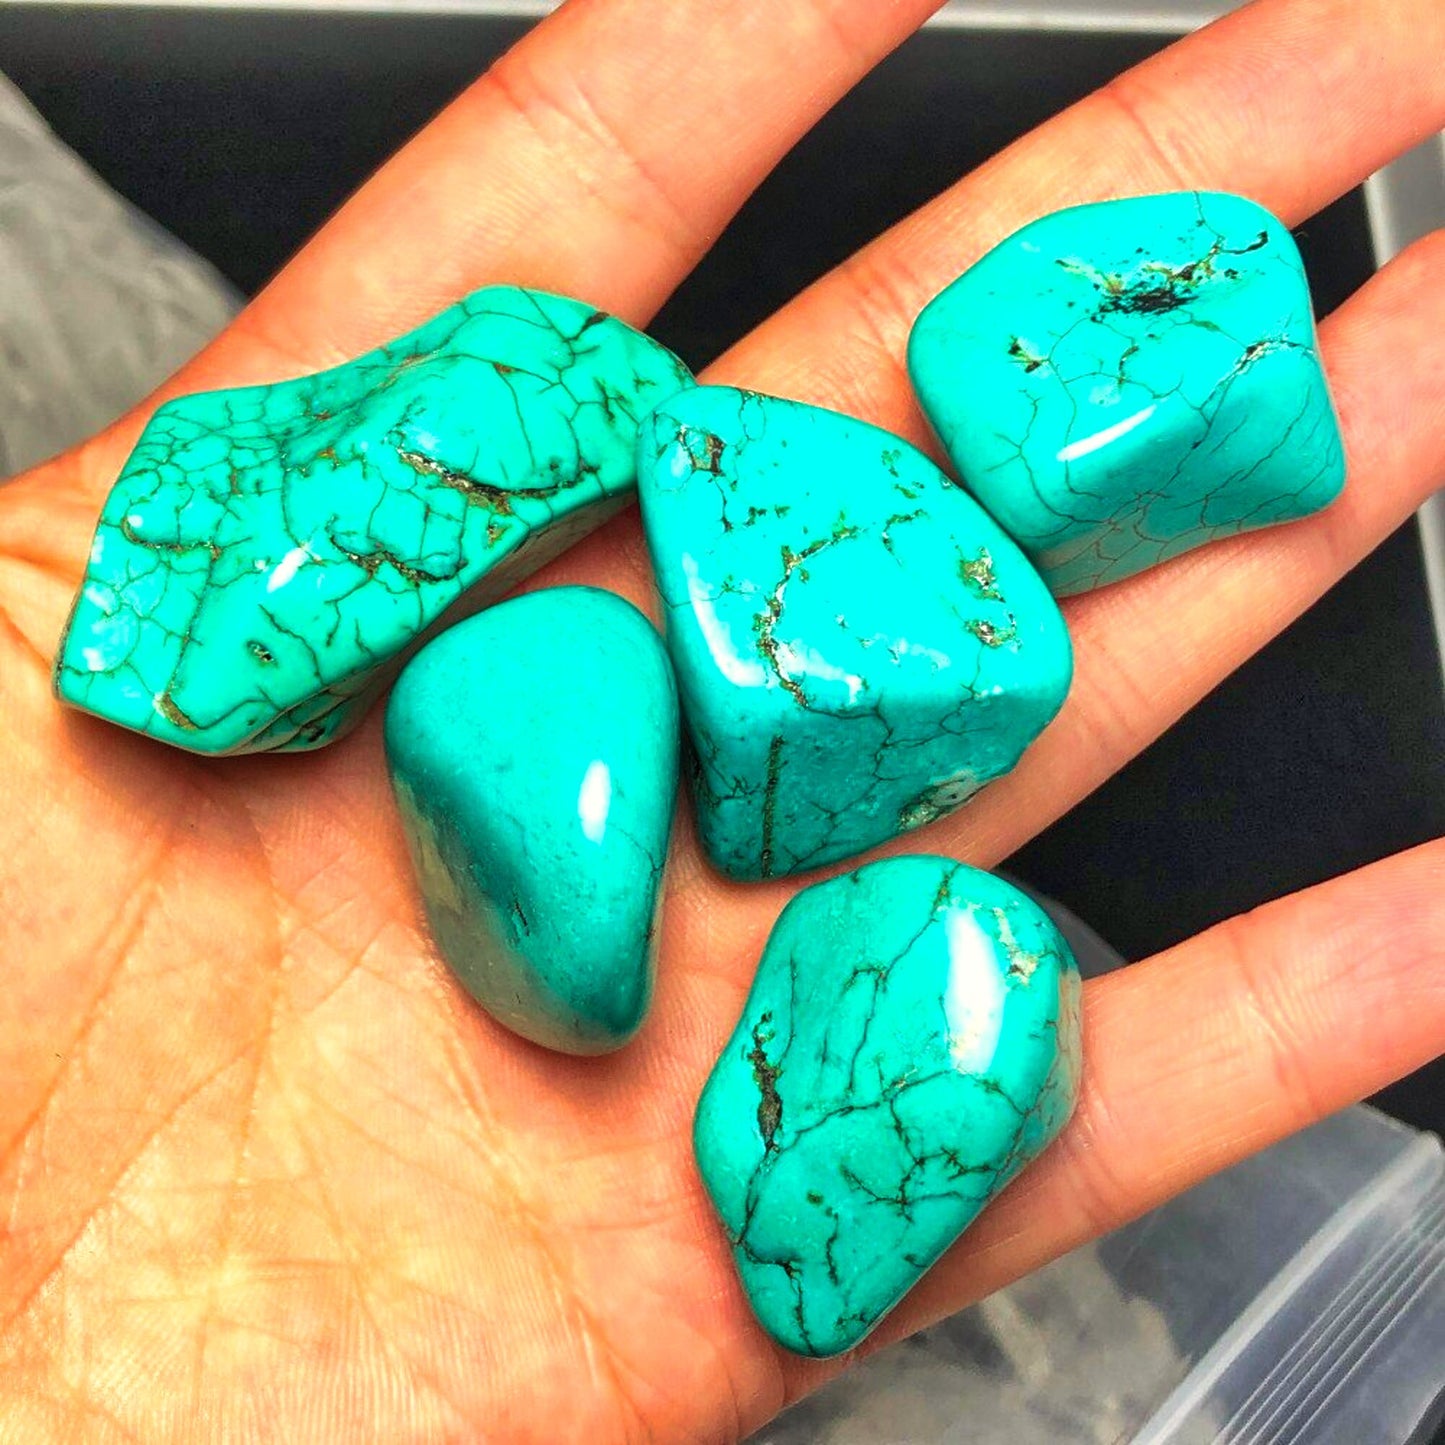 Polished Turquoise Large Crystal Particles (1 lb)